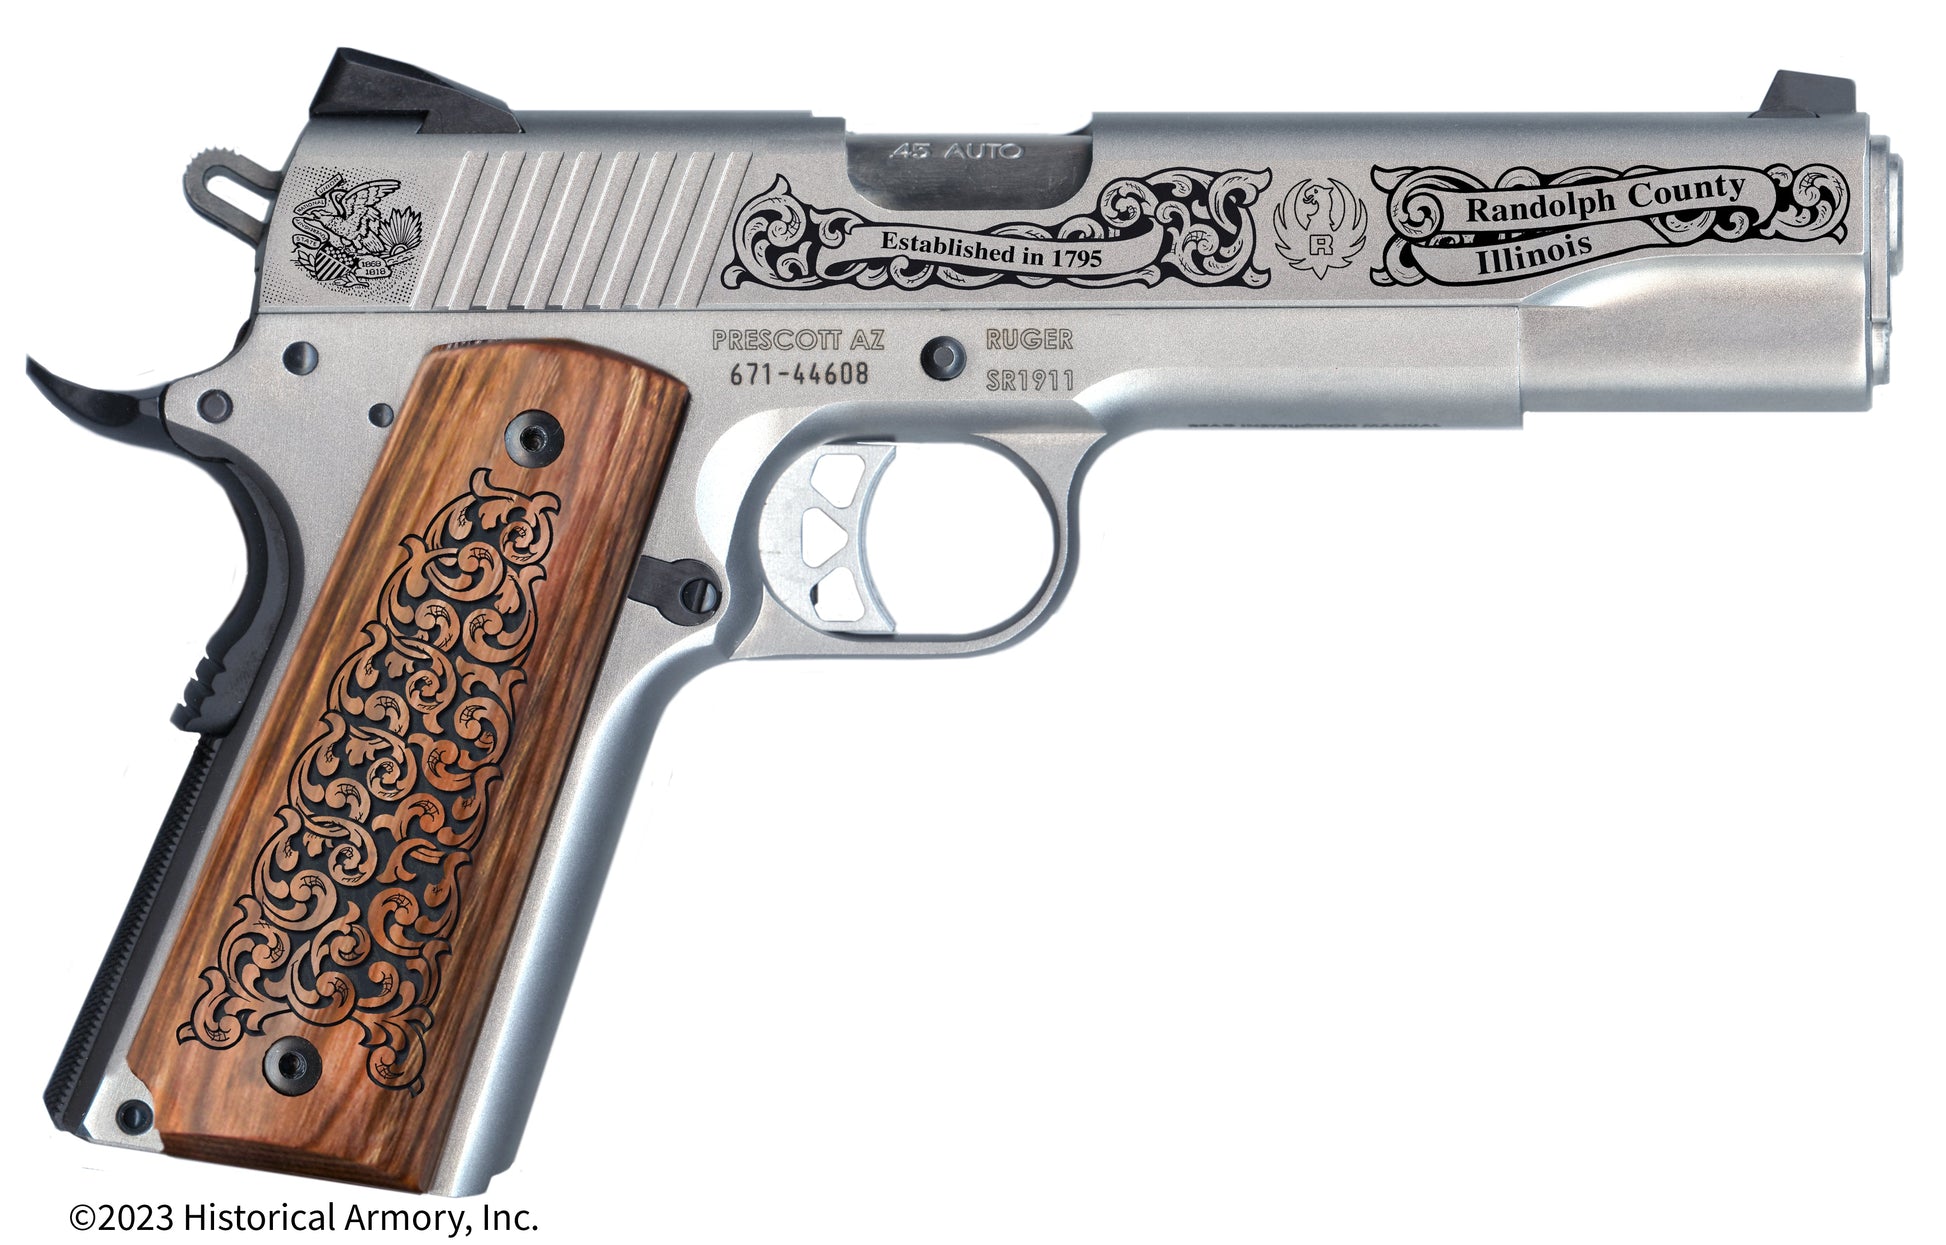 Randolph County Illinois Engraved .45 Auto Ruger 1911